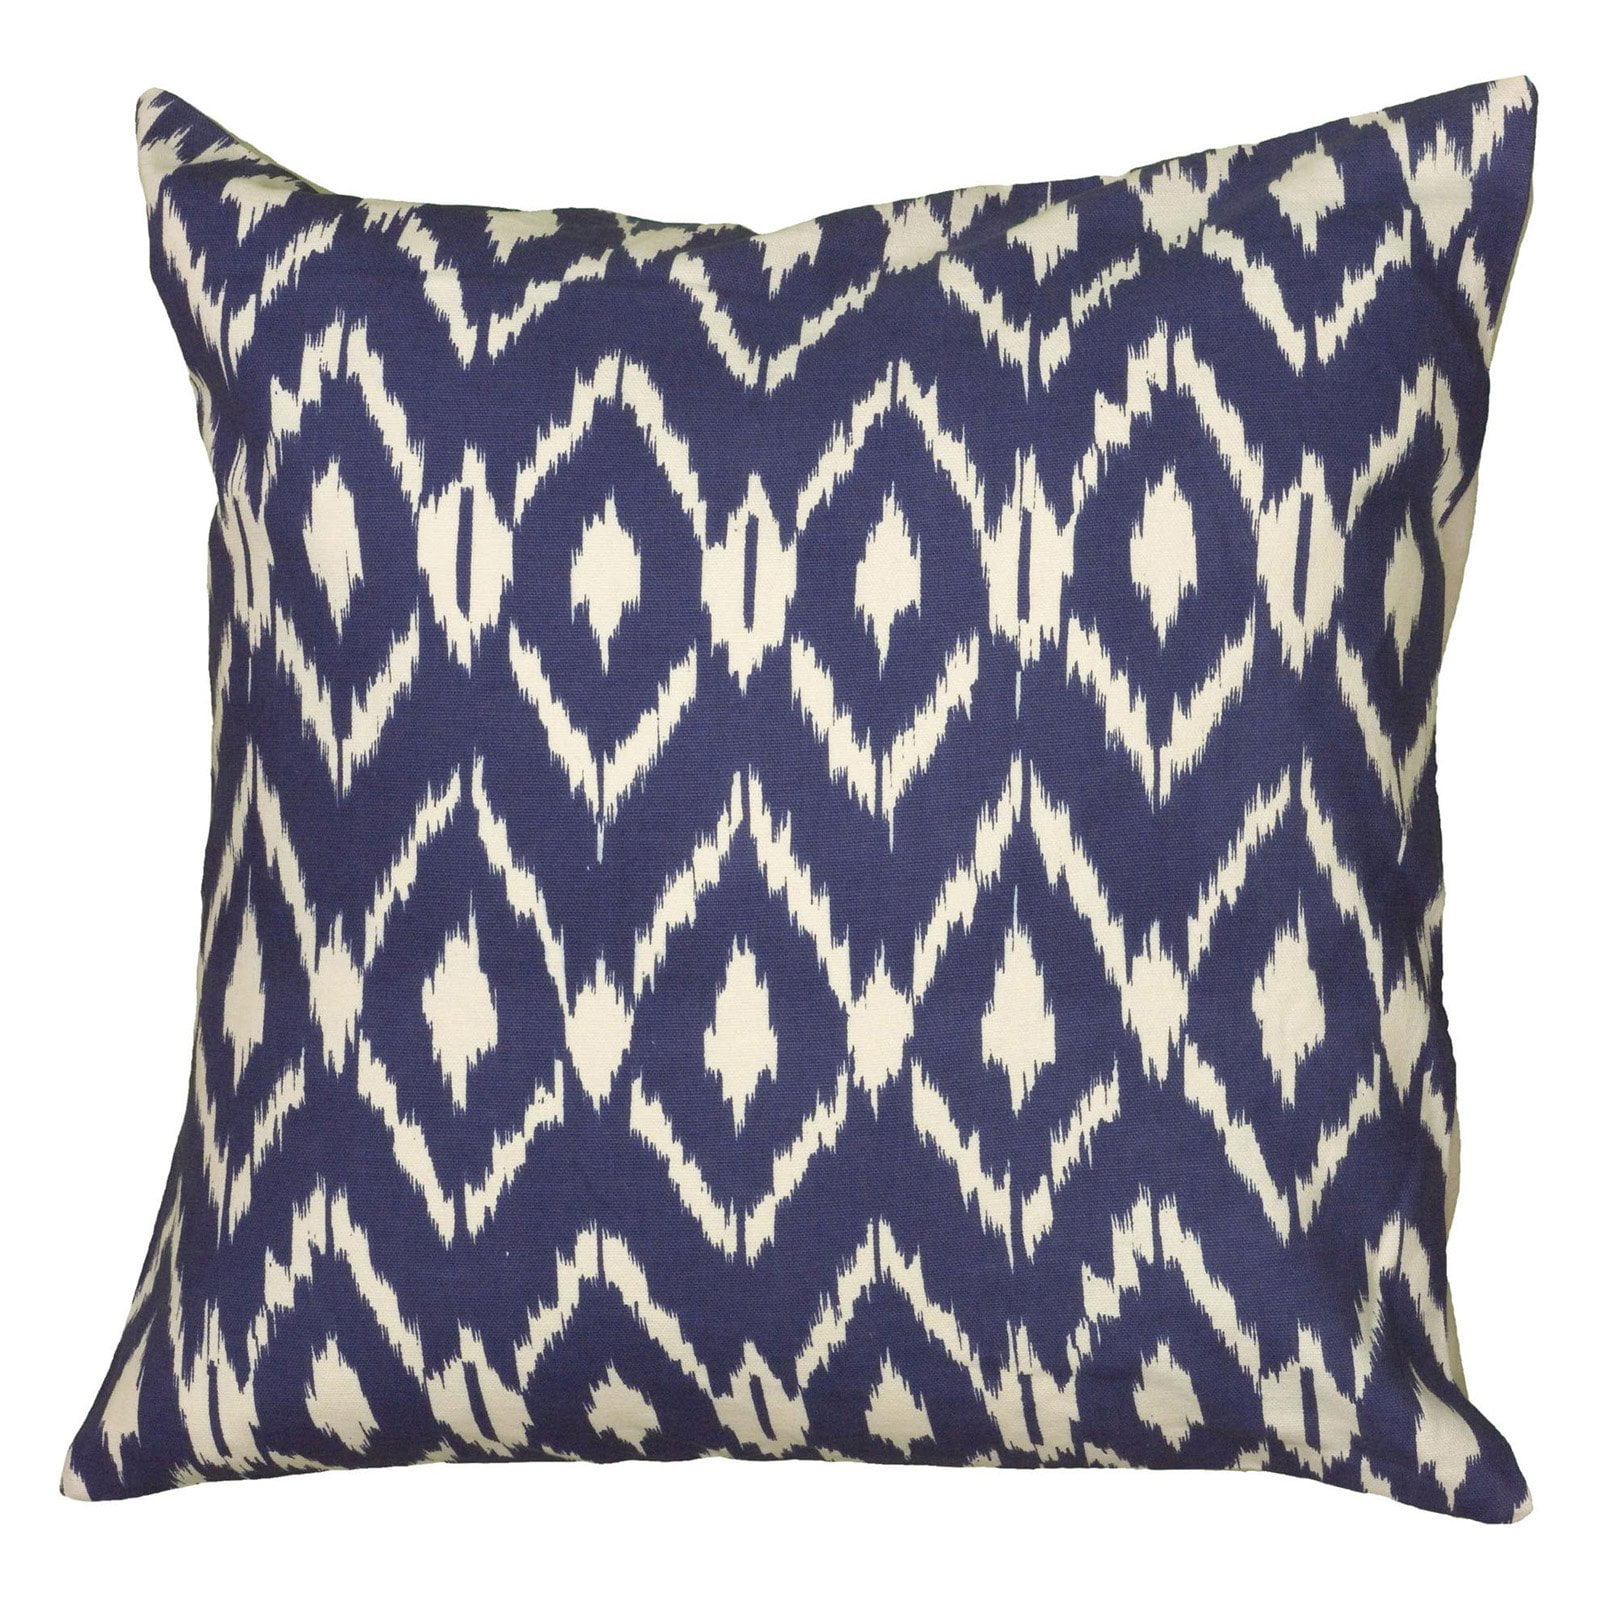 The Pillow Collection Edana Graphic Throw Pillow Cover P18FLAT-FT-29007-BLUEMARINE-OUT